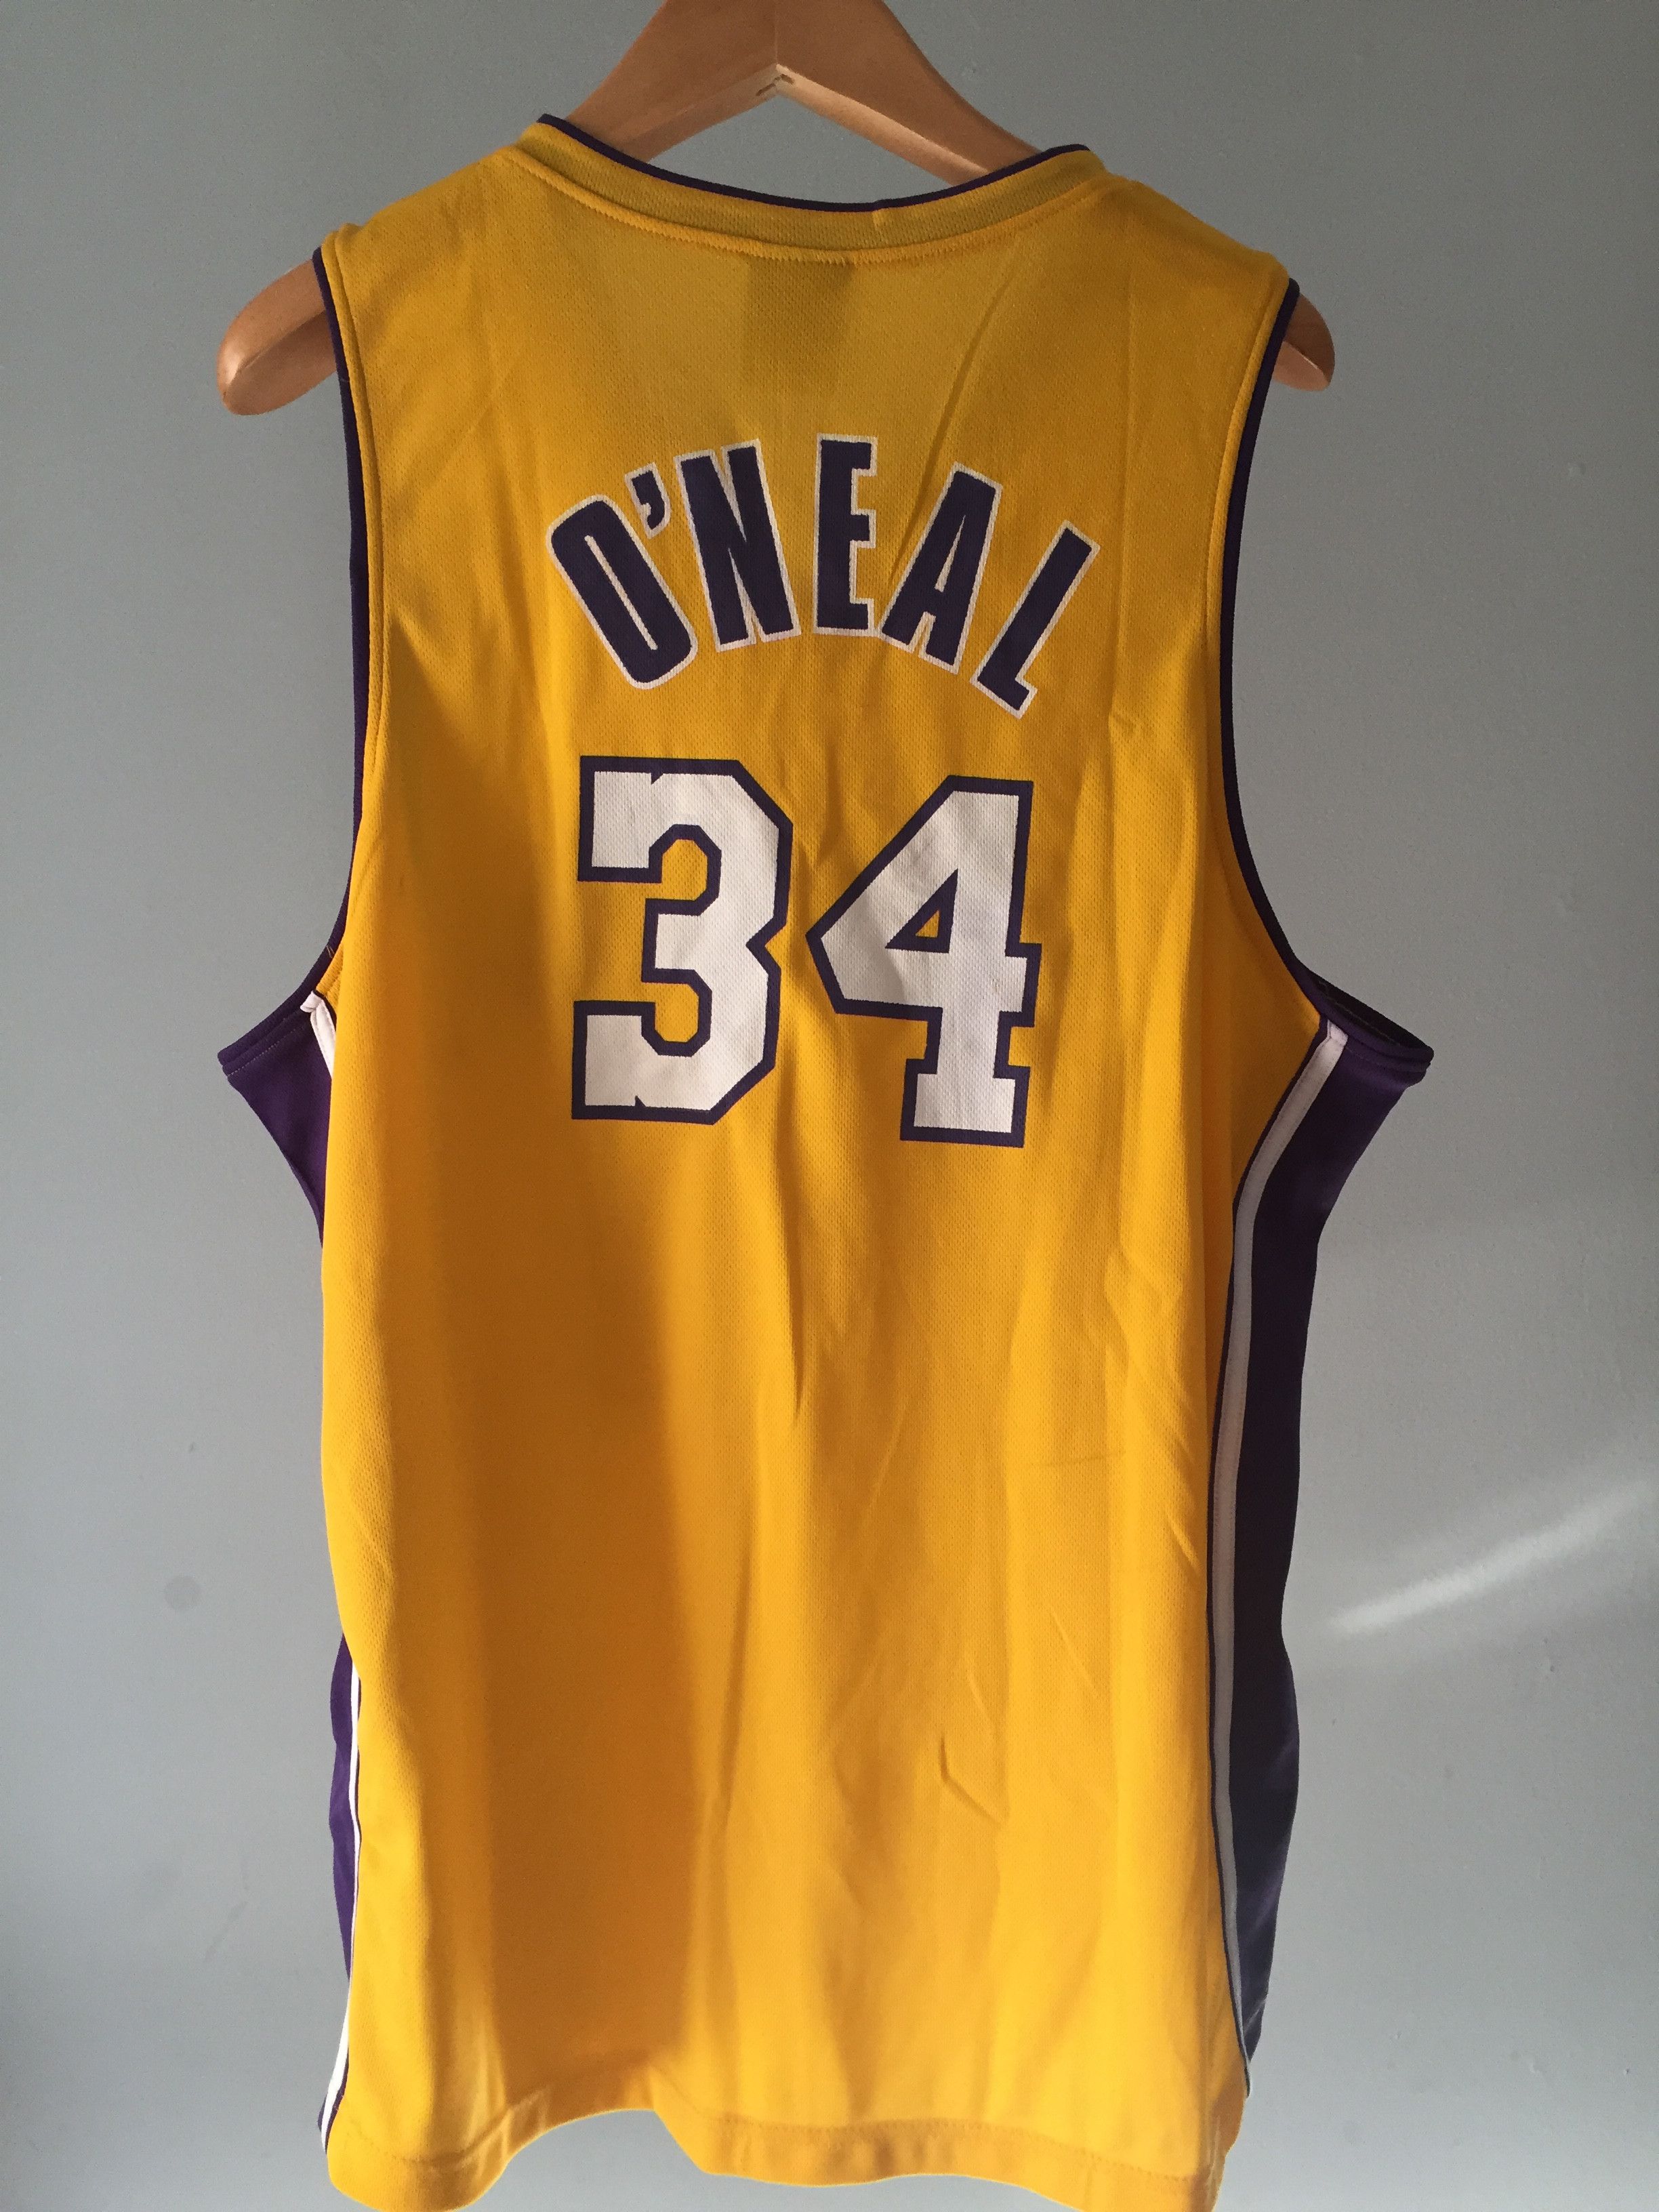 Los Angeles Jersey Los Angeles lakers O'Neal jersey 34 Size US XL / EU 56 / 4 - 4 Preview